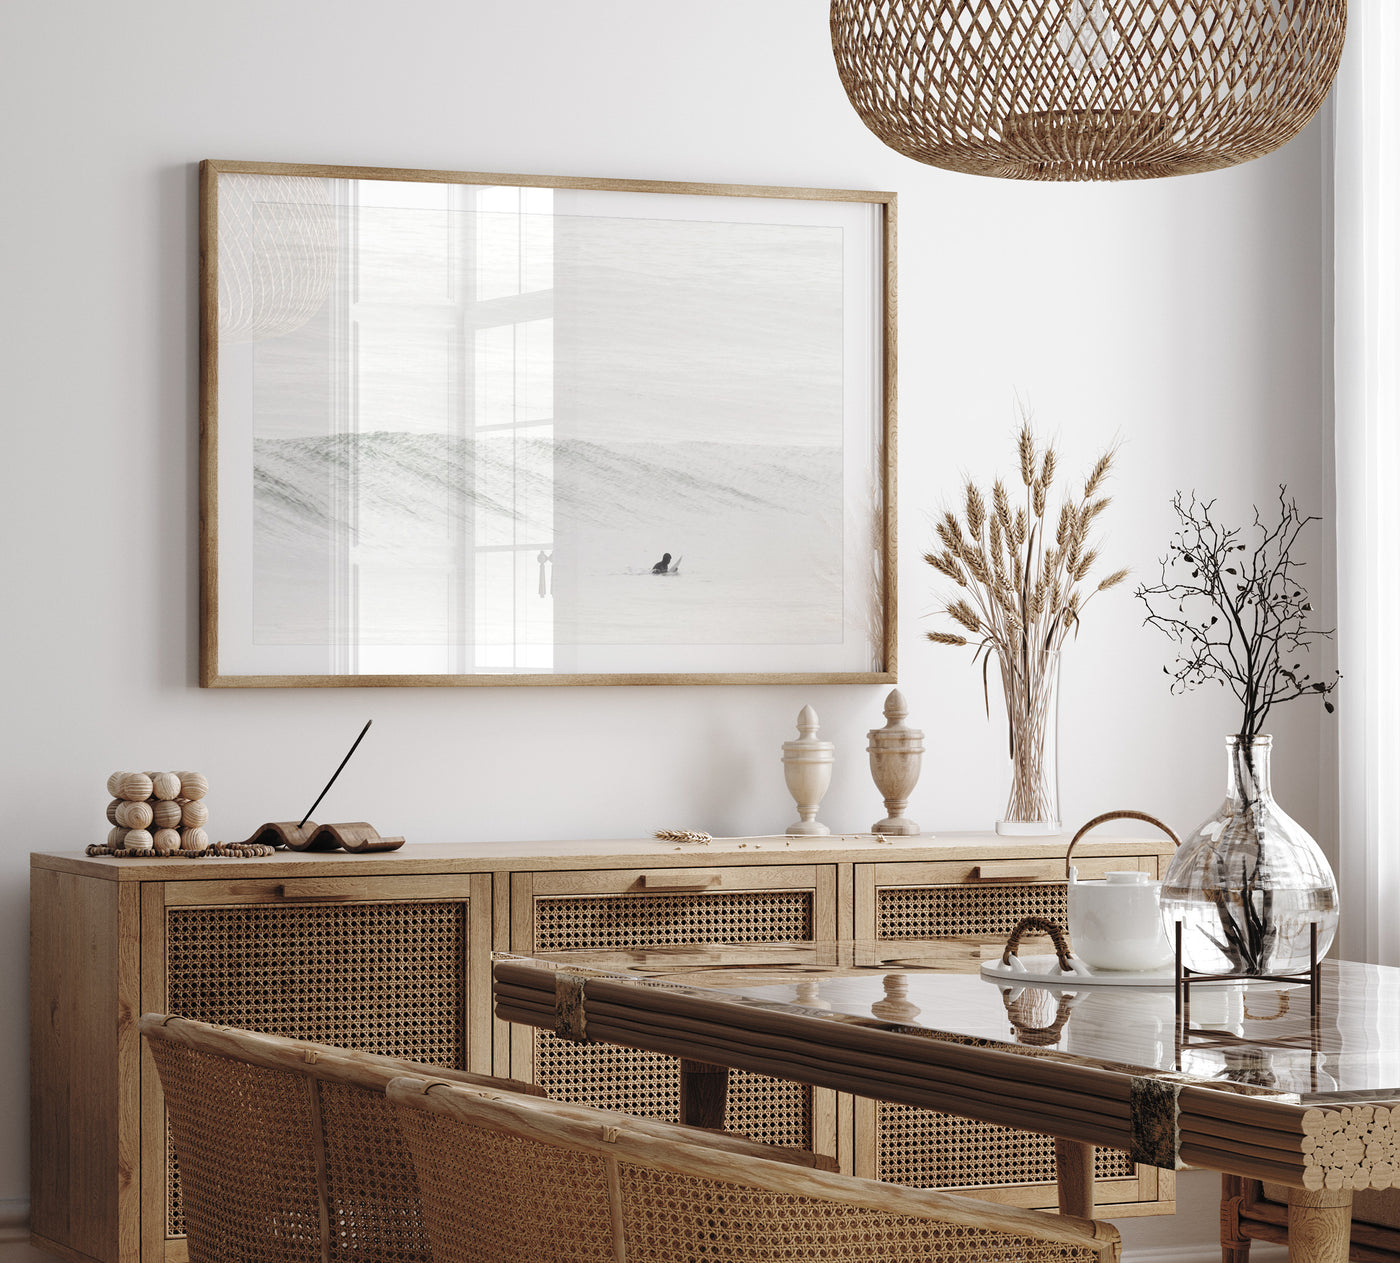 Surfing No 9 - Large fine art print by Cattie Coyle Photography in dining room